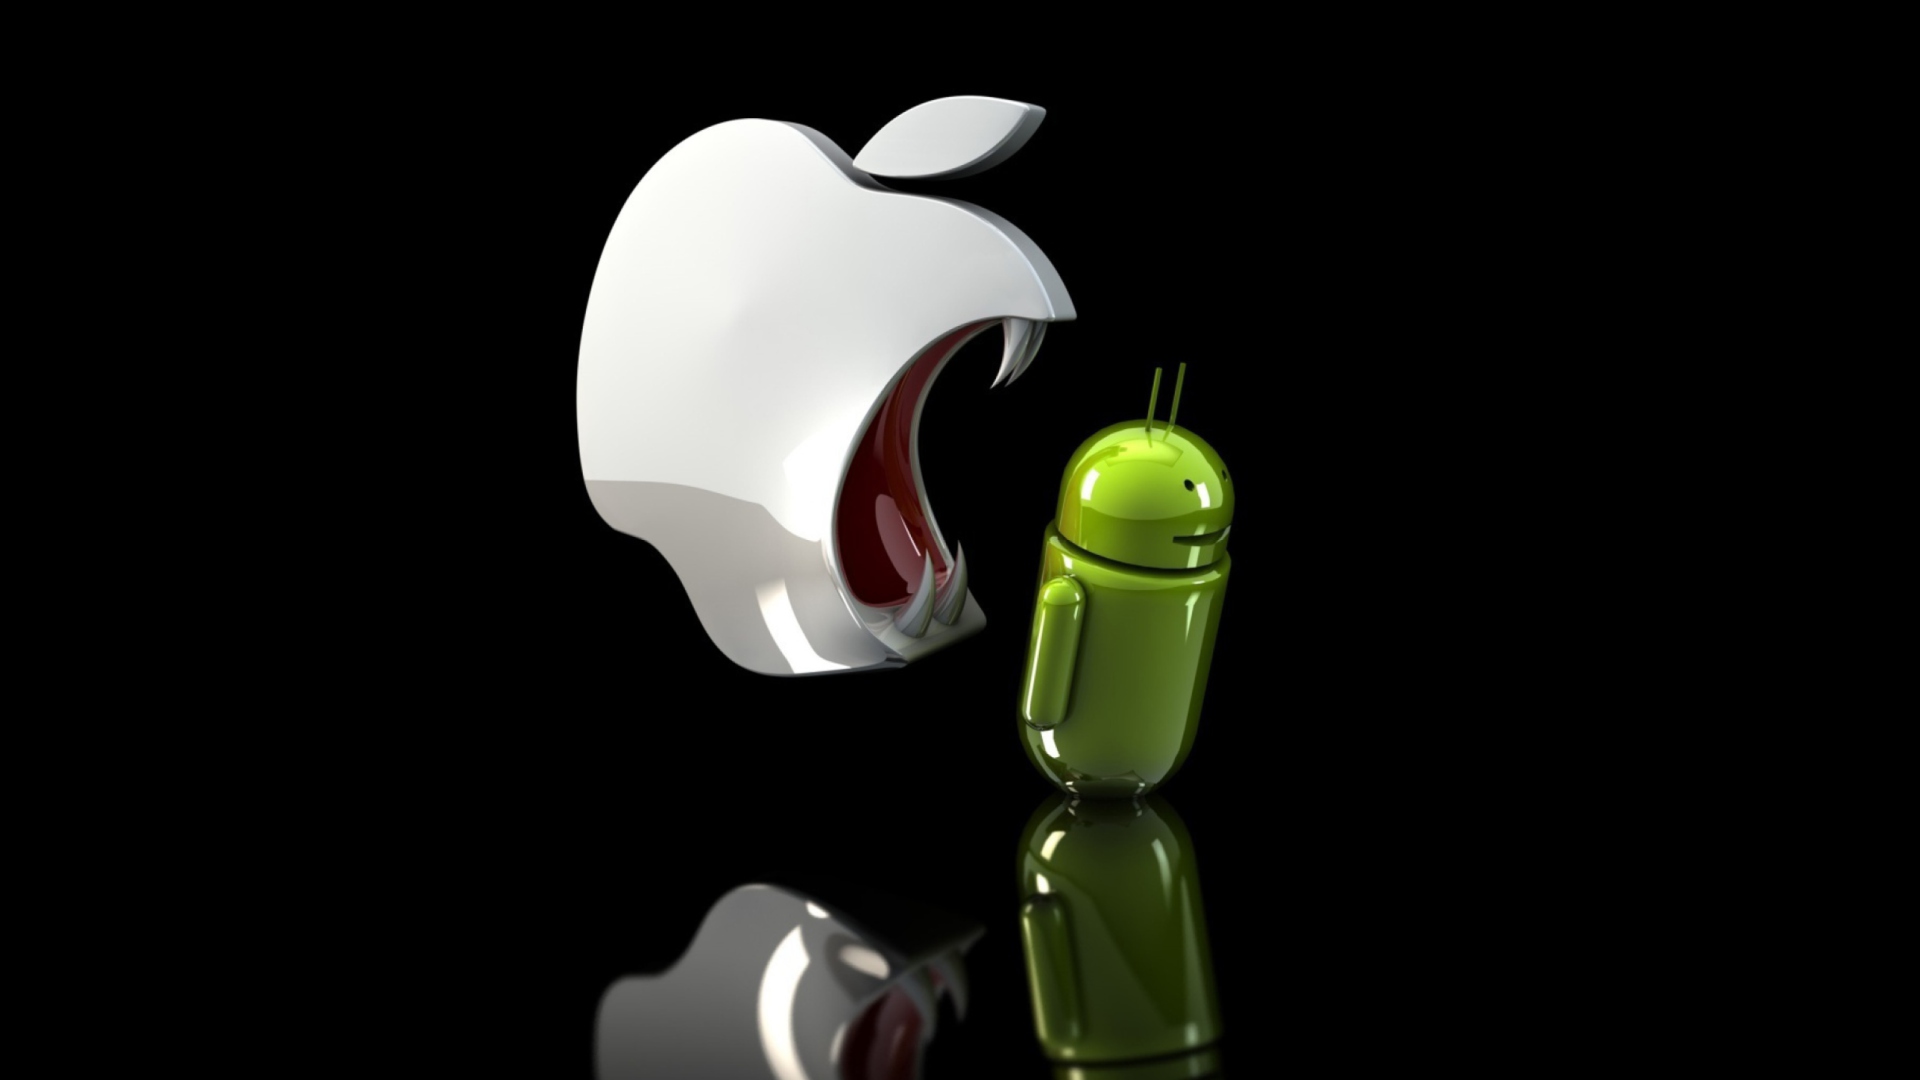 Apple Against Android wallpaper 1920x1080